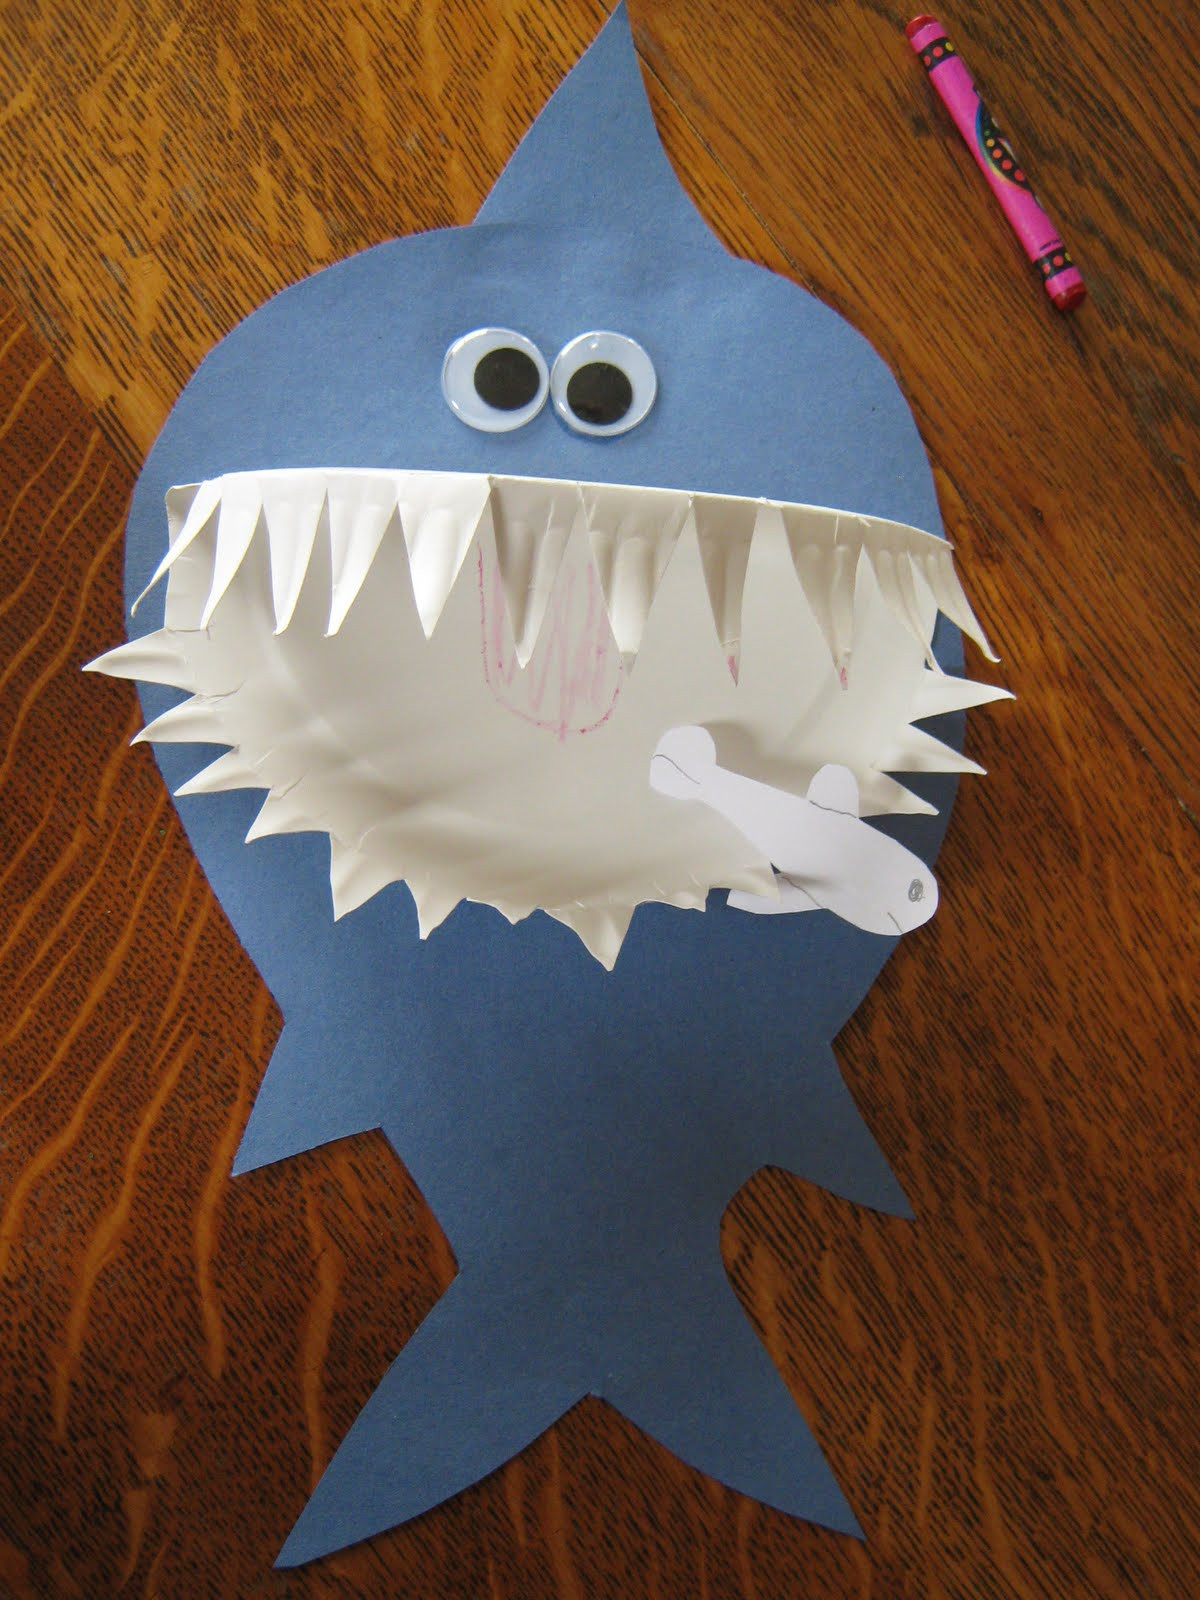 Arts And Crafts For Preschoolers
 Almost Unschoolers Paper Plate Shark Craft